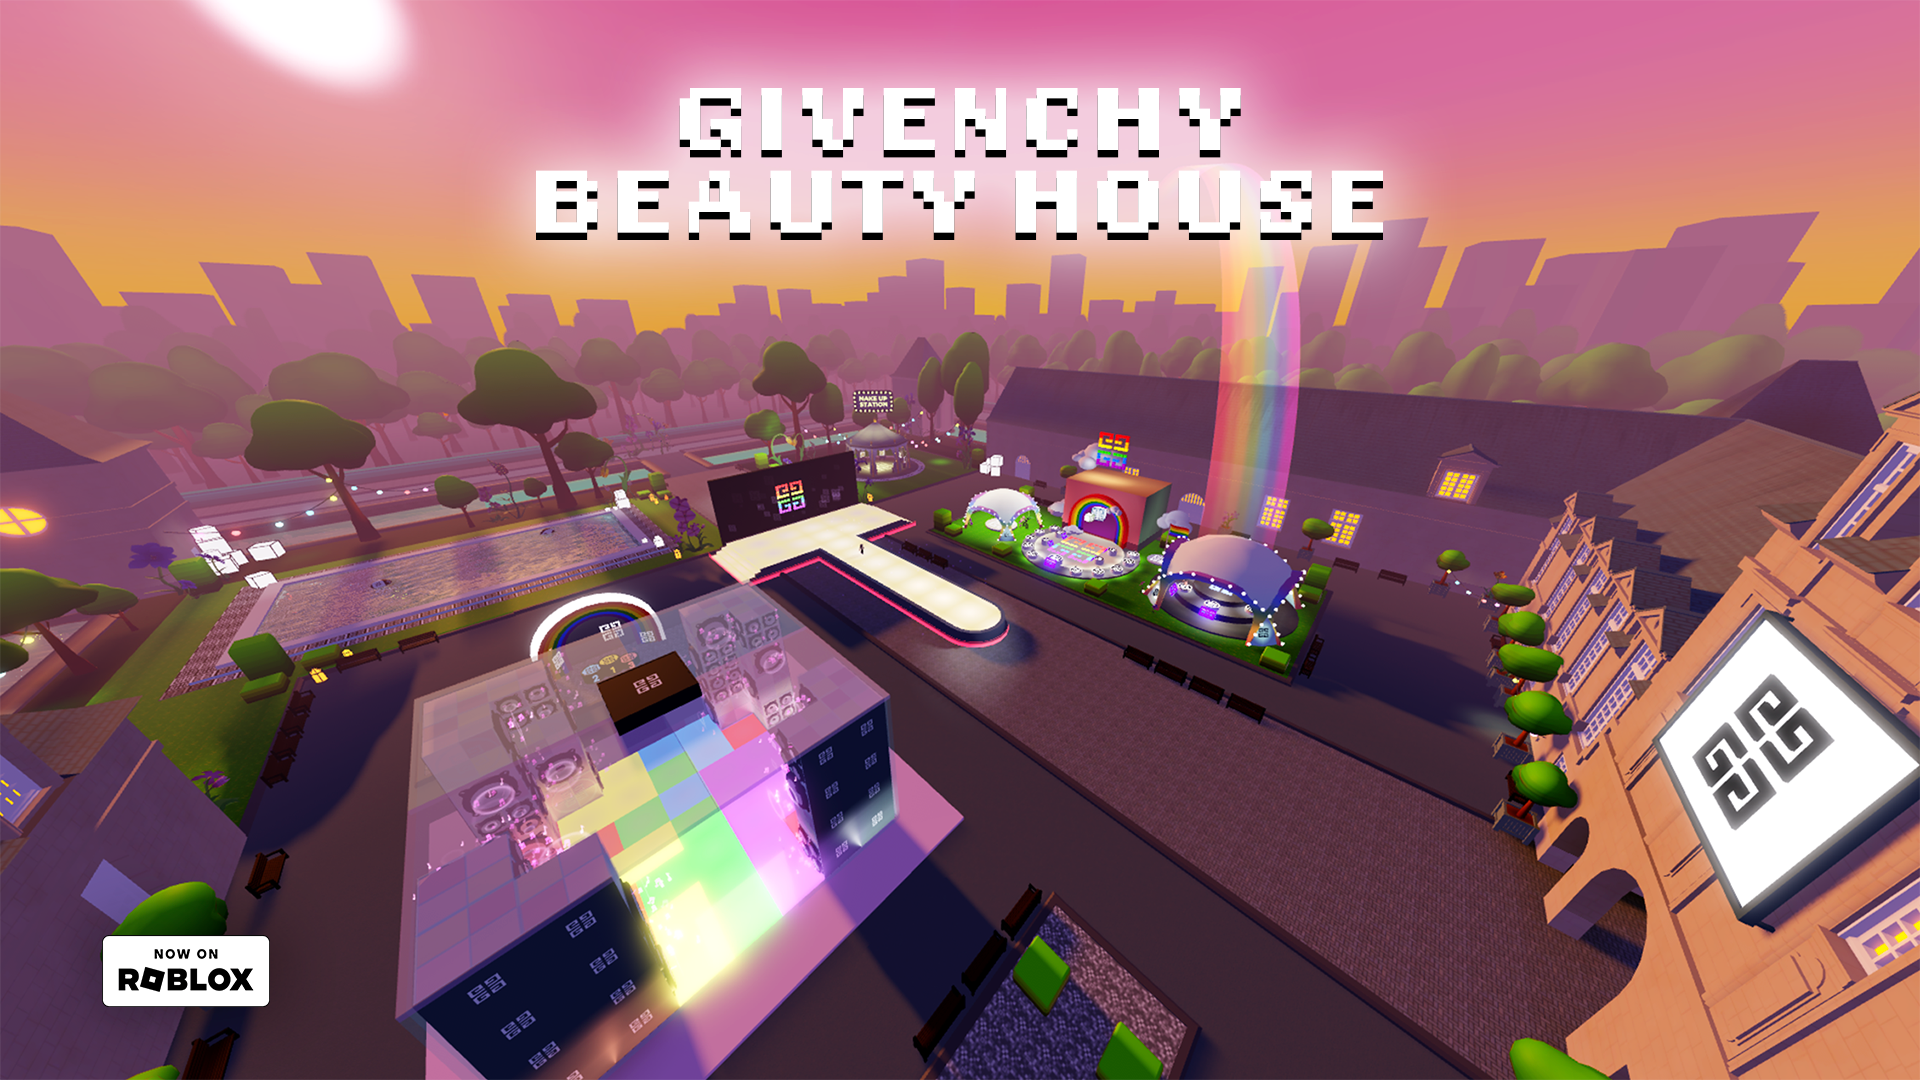 GIvenchy Beauty has given its Roblox destination a Pride-themed makeover. Image: Roblox